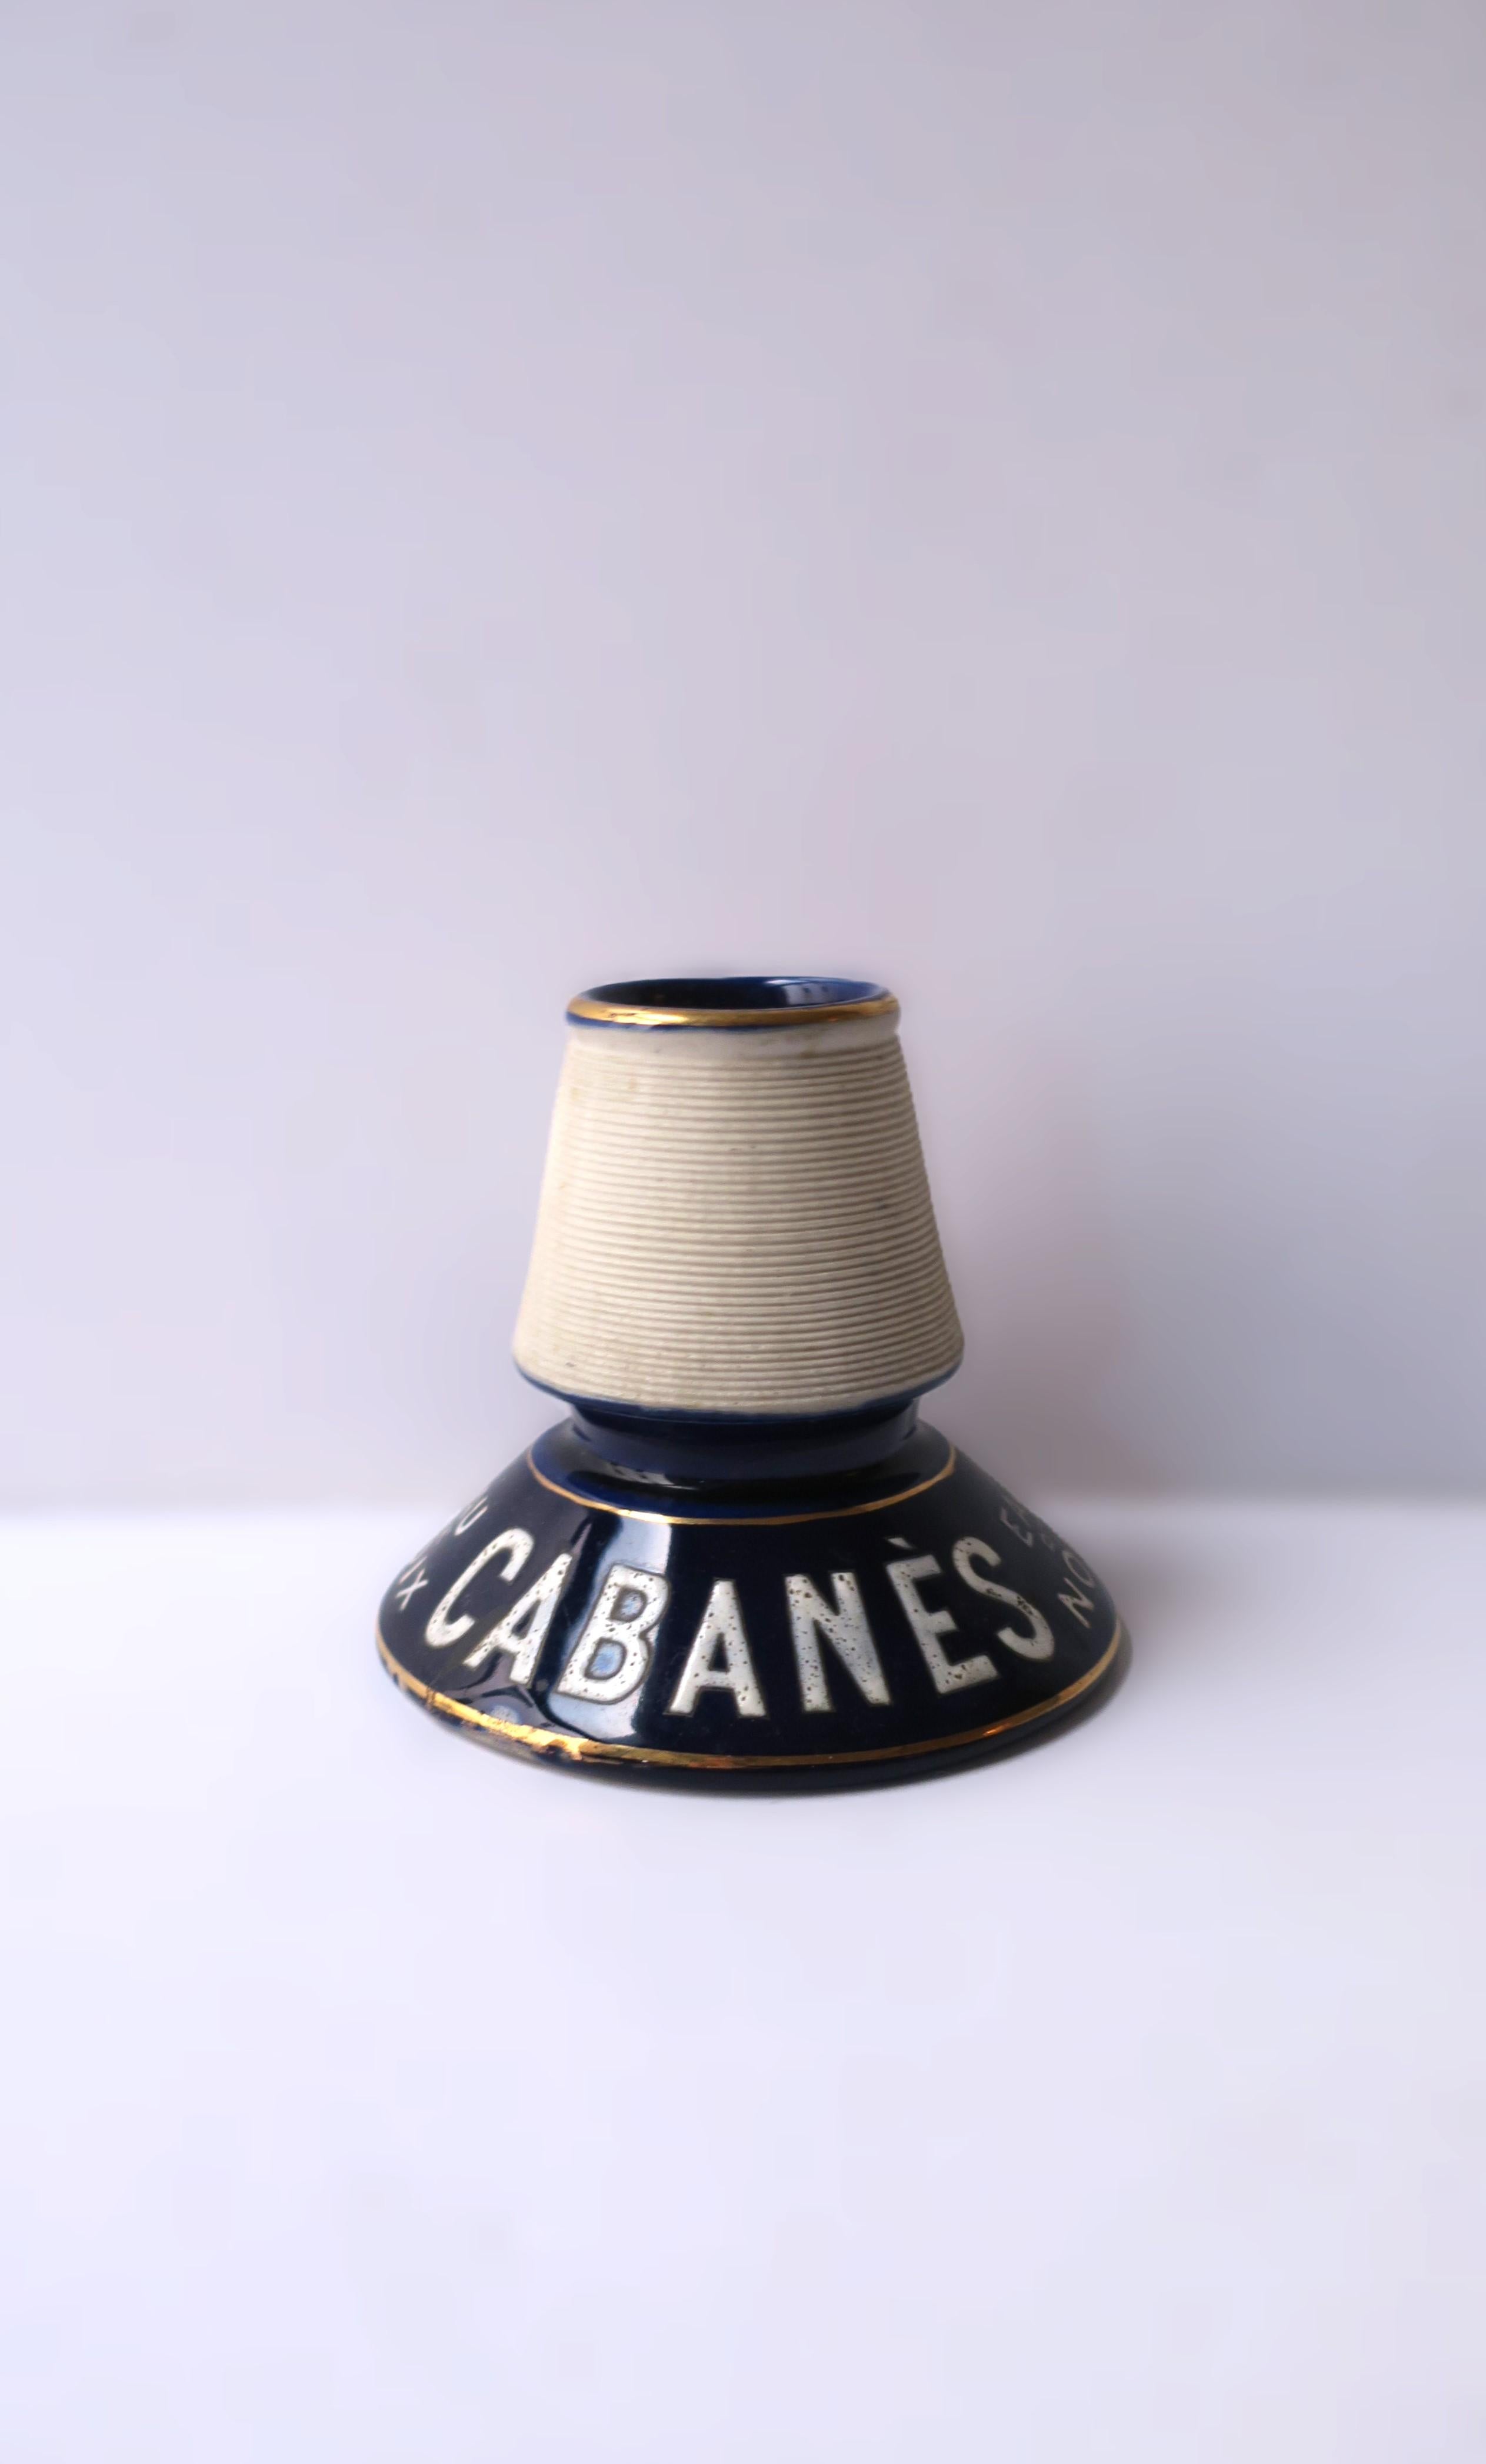 A French porcelain match striker, circa early-20th century, France. Reads: 'EAU DE NOIX CABANÉS.' Colors include a very dark blue, off-white and gold. No chips noted. 